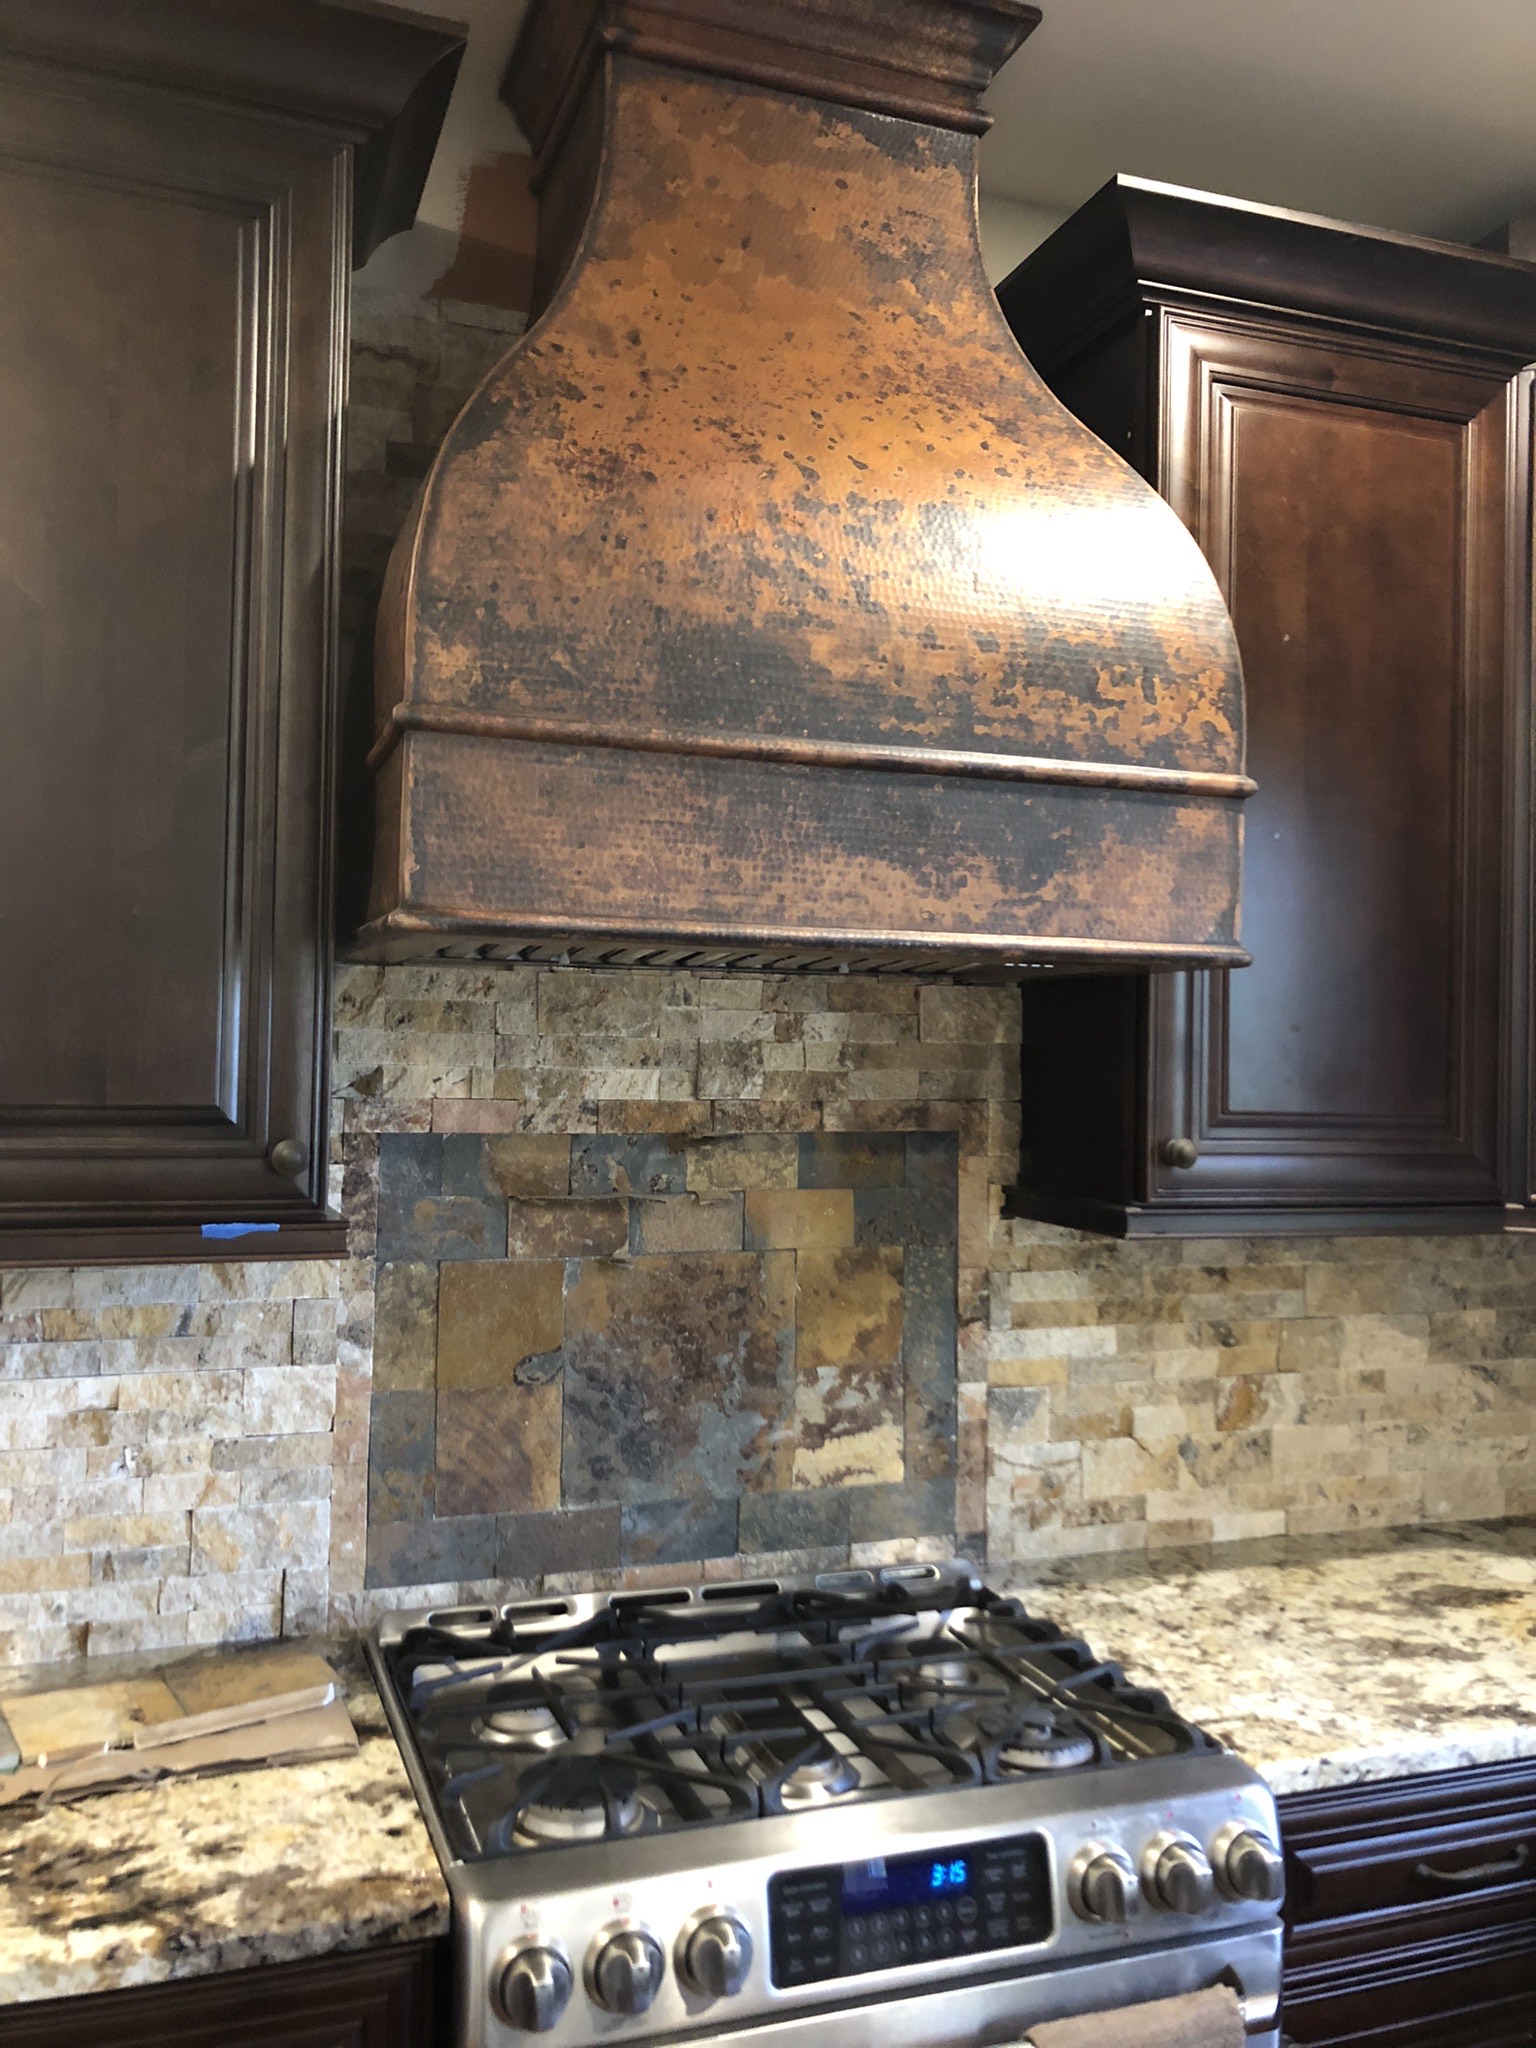 A rustic-inspired kitchen with brown cabinets, marble countertops, brick backsplash, complemented by a stylish range hood design